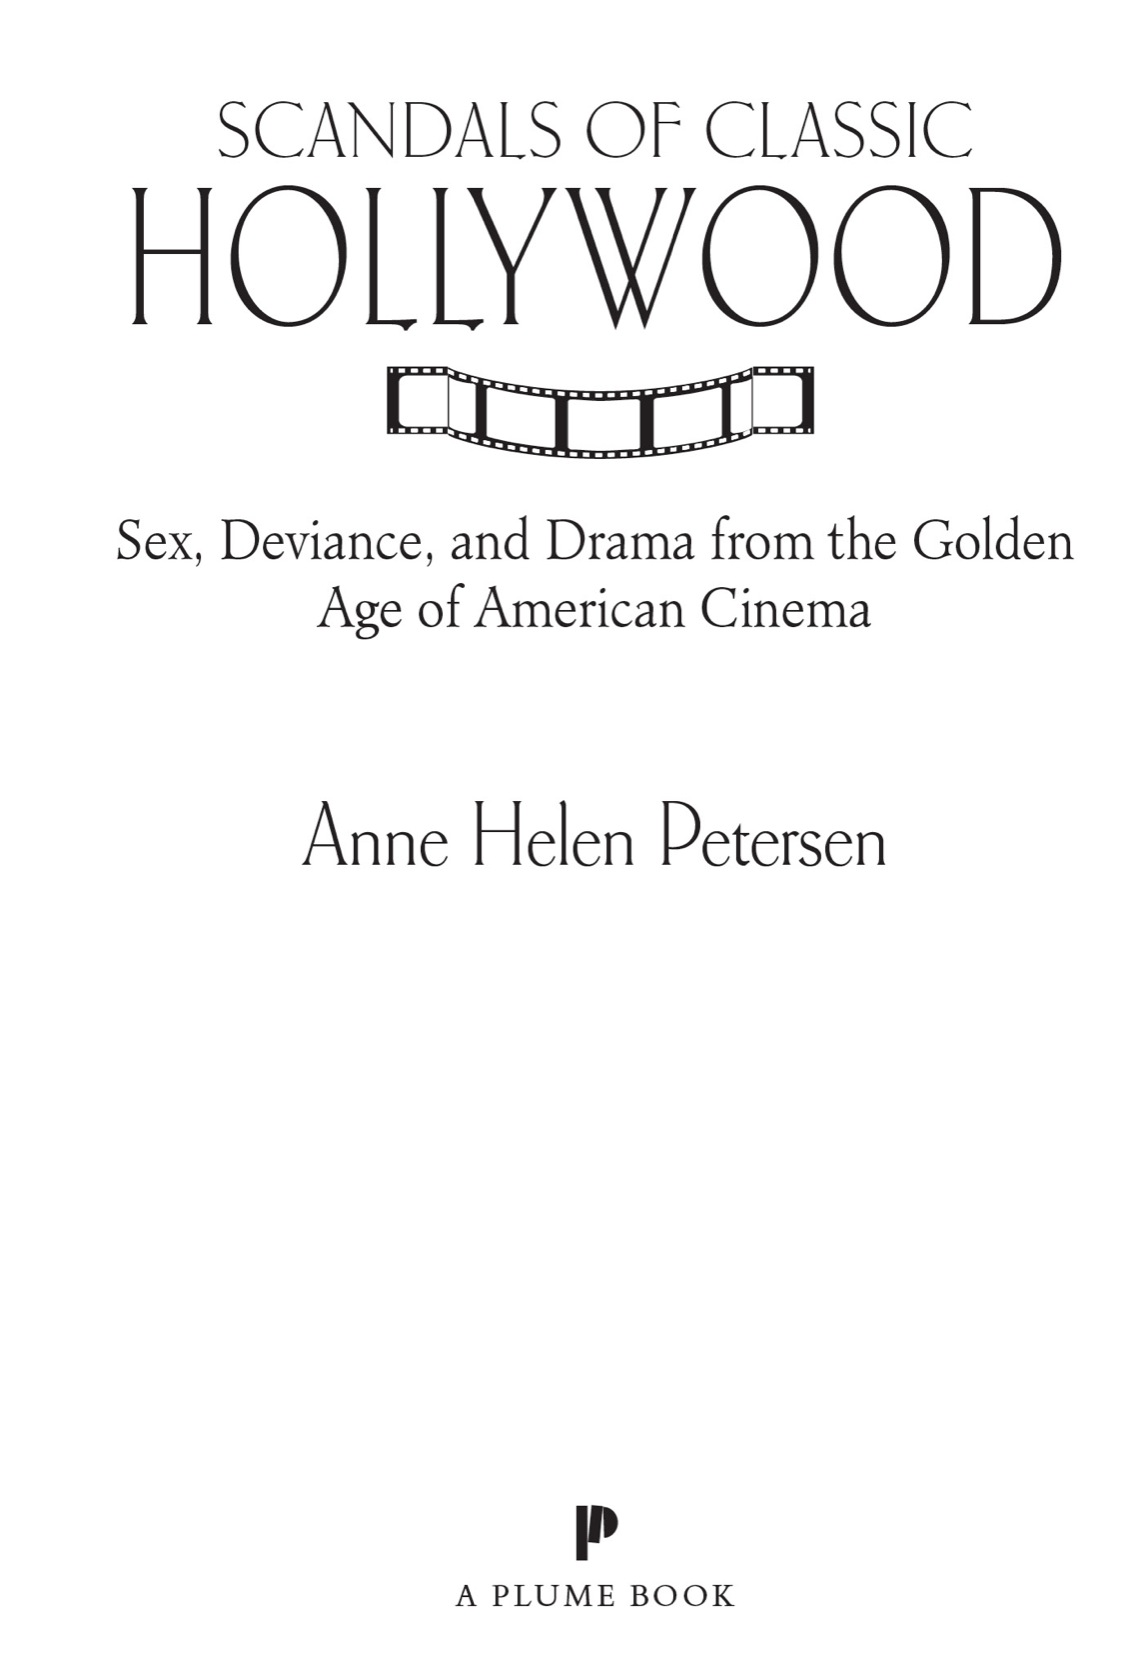 Scandals of Classic Hollywood Sex Deviance and Drama from the Golden Age of American Cinema - image 3